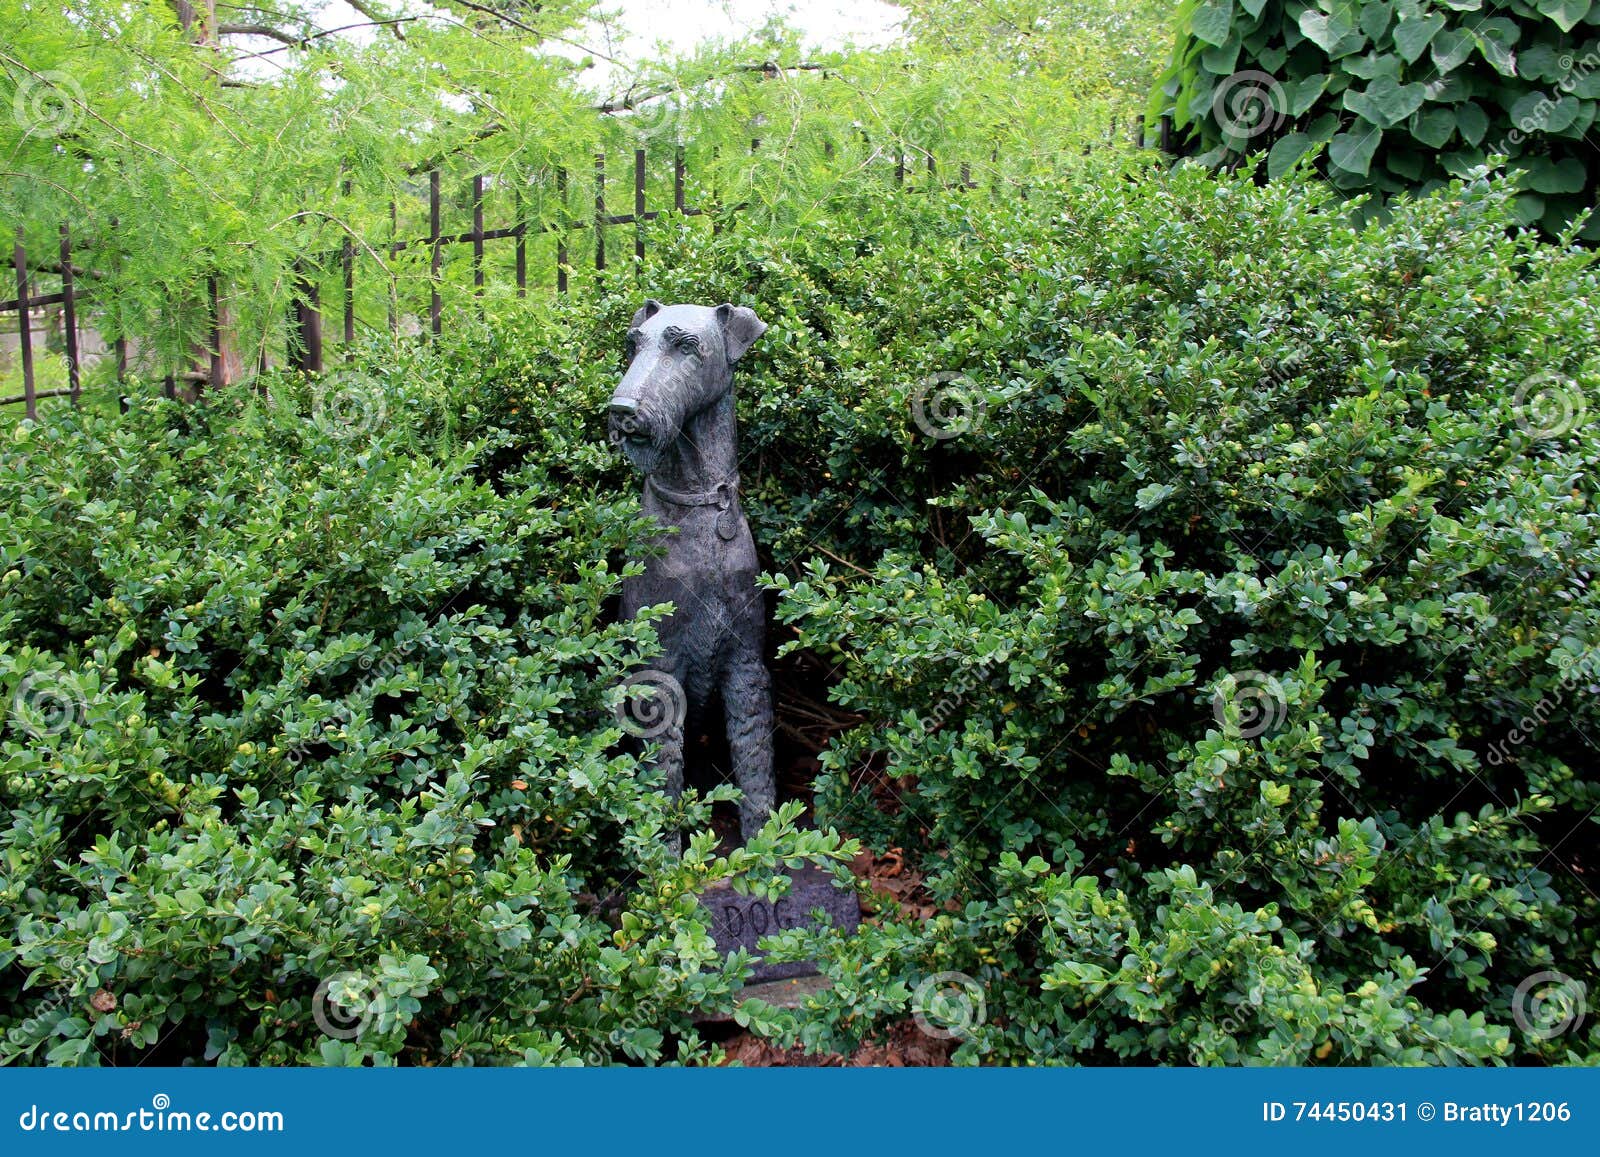 Adorable Detail Of Carved Dog Sculpture Tucked Into Garden